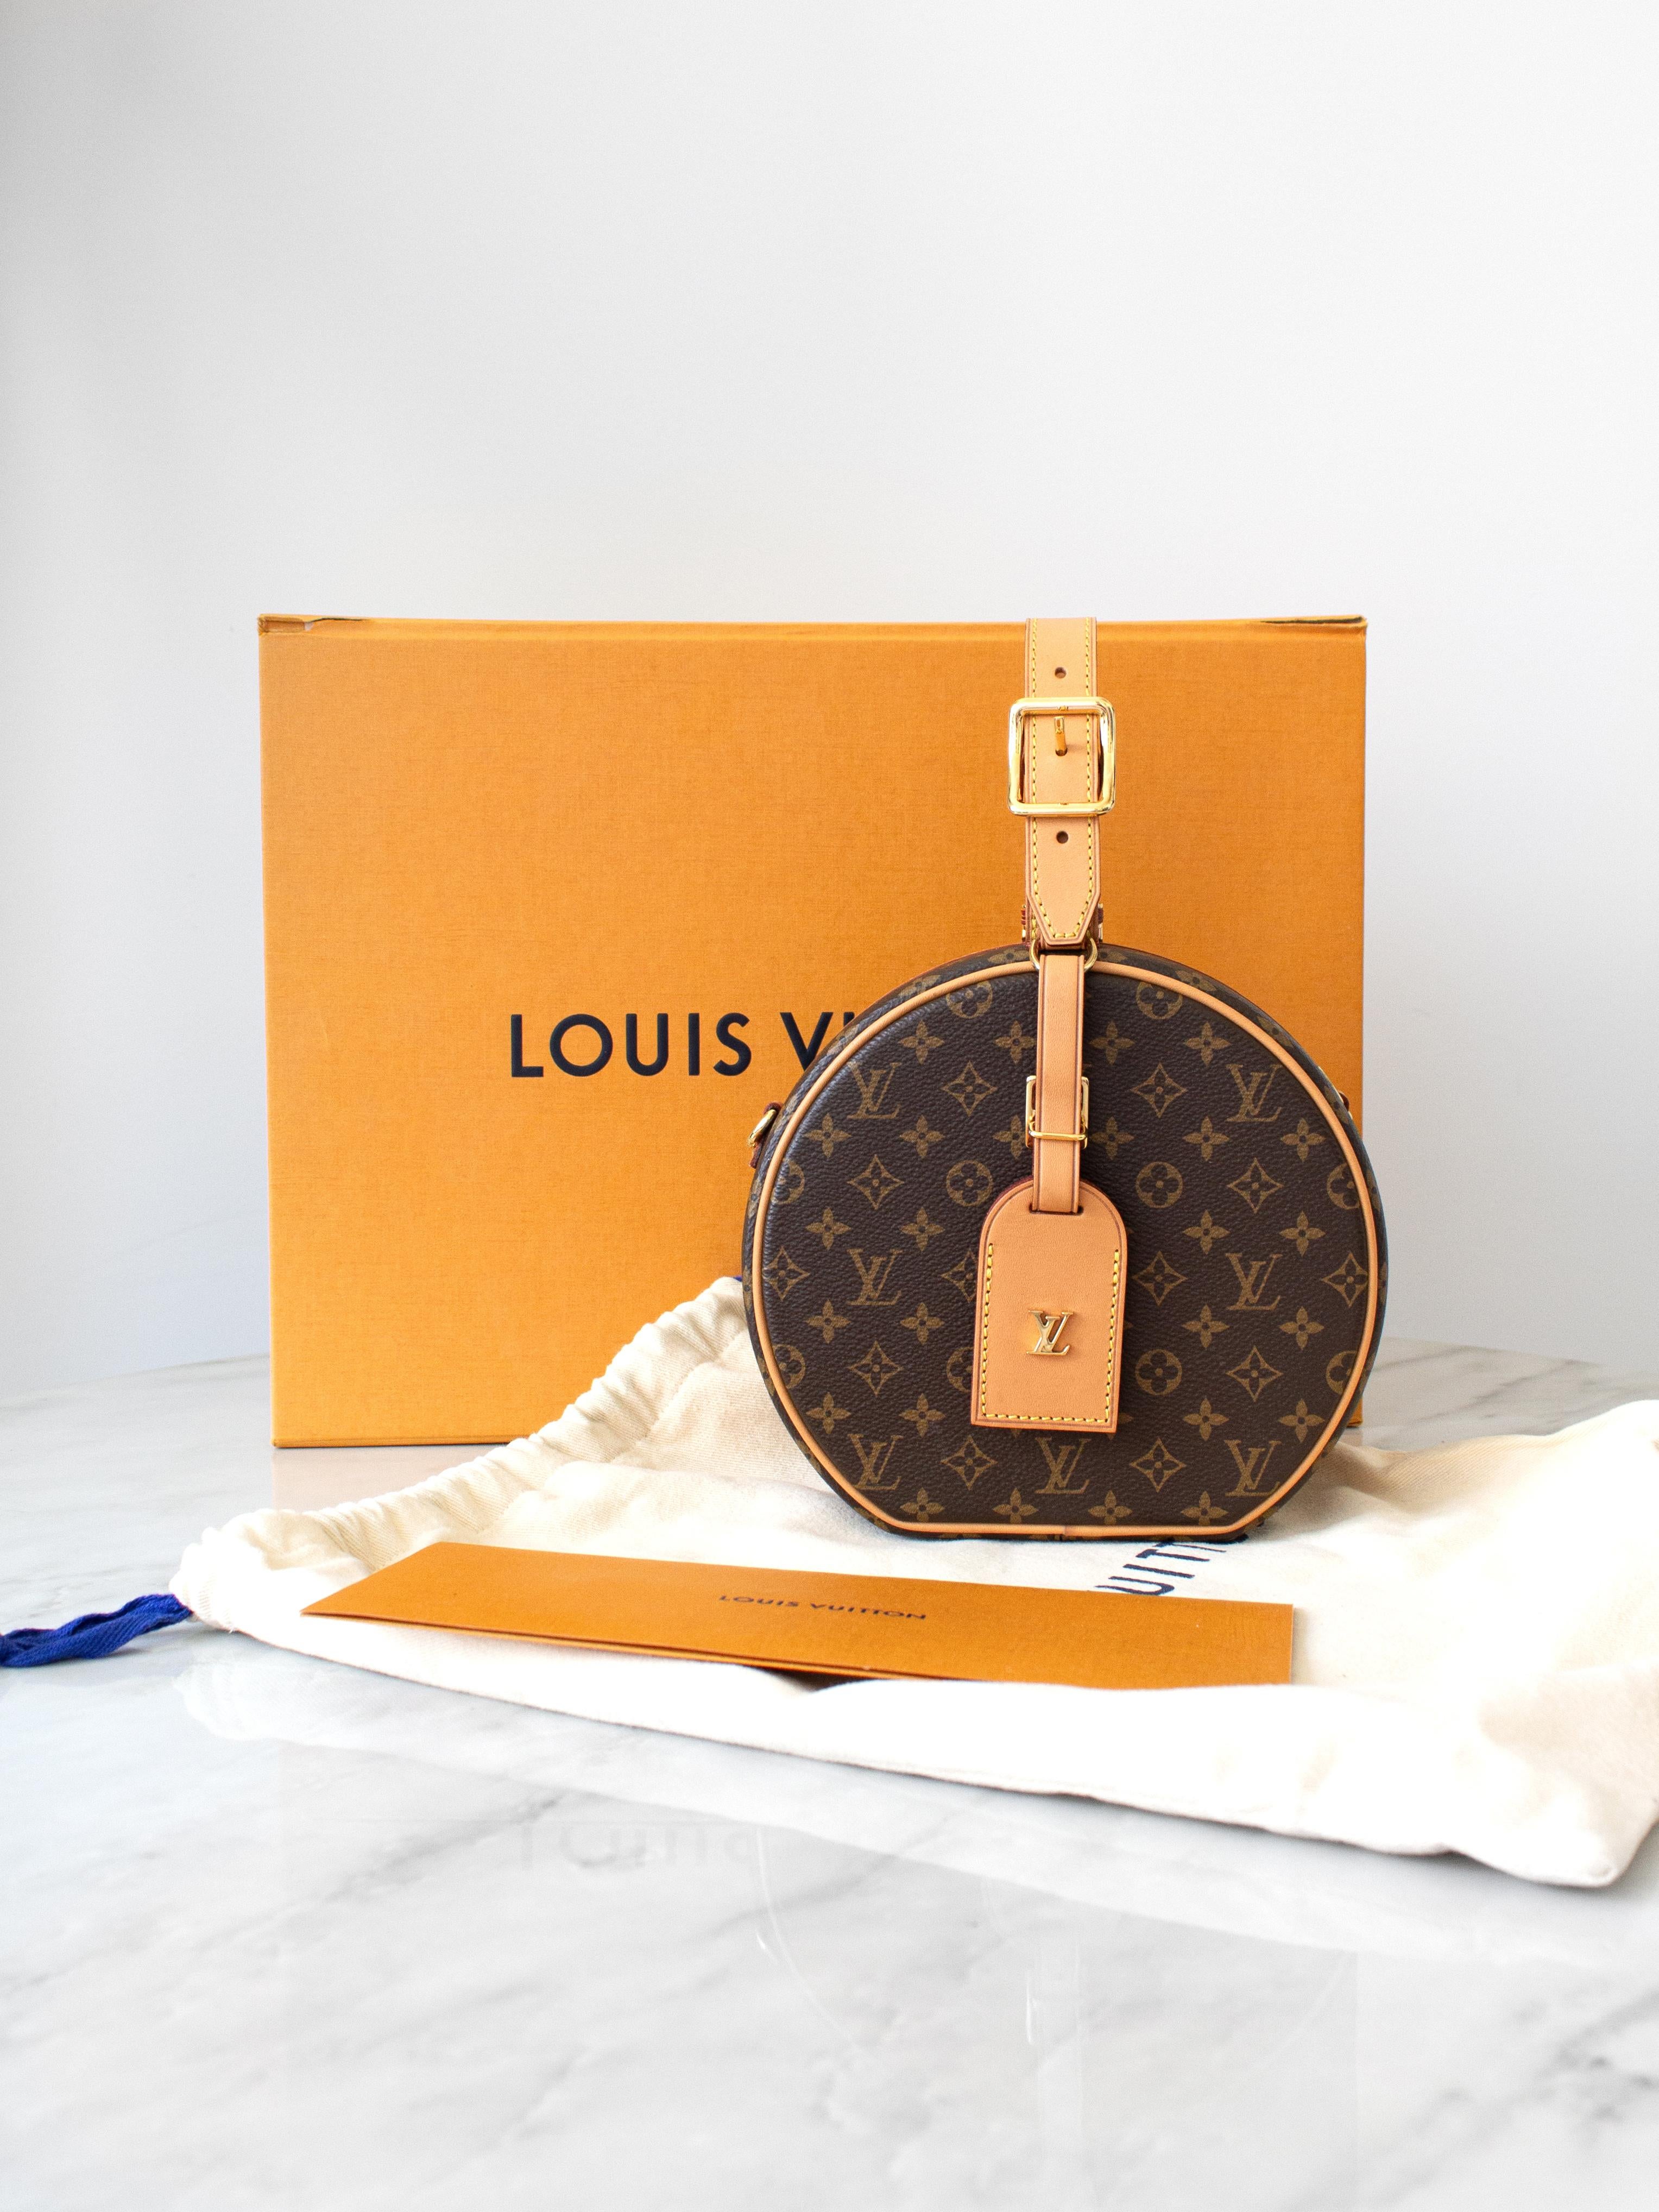 Introducing the Louis Vuitton Petite Boîte Chapeau: a charming bag inspired by the classic hatbox. This rare first edition bag, dating back to 2018, boasts a petite yet practical design crafted from classic coated monogram canvas adorned with